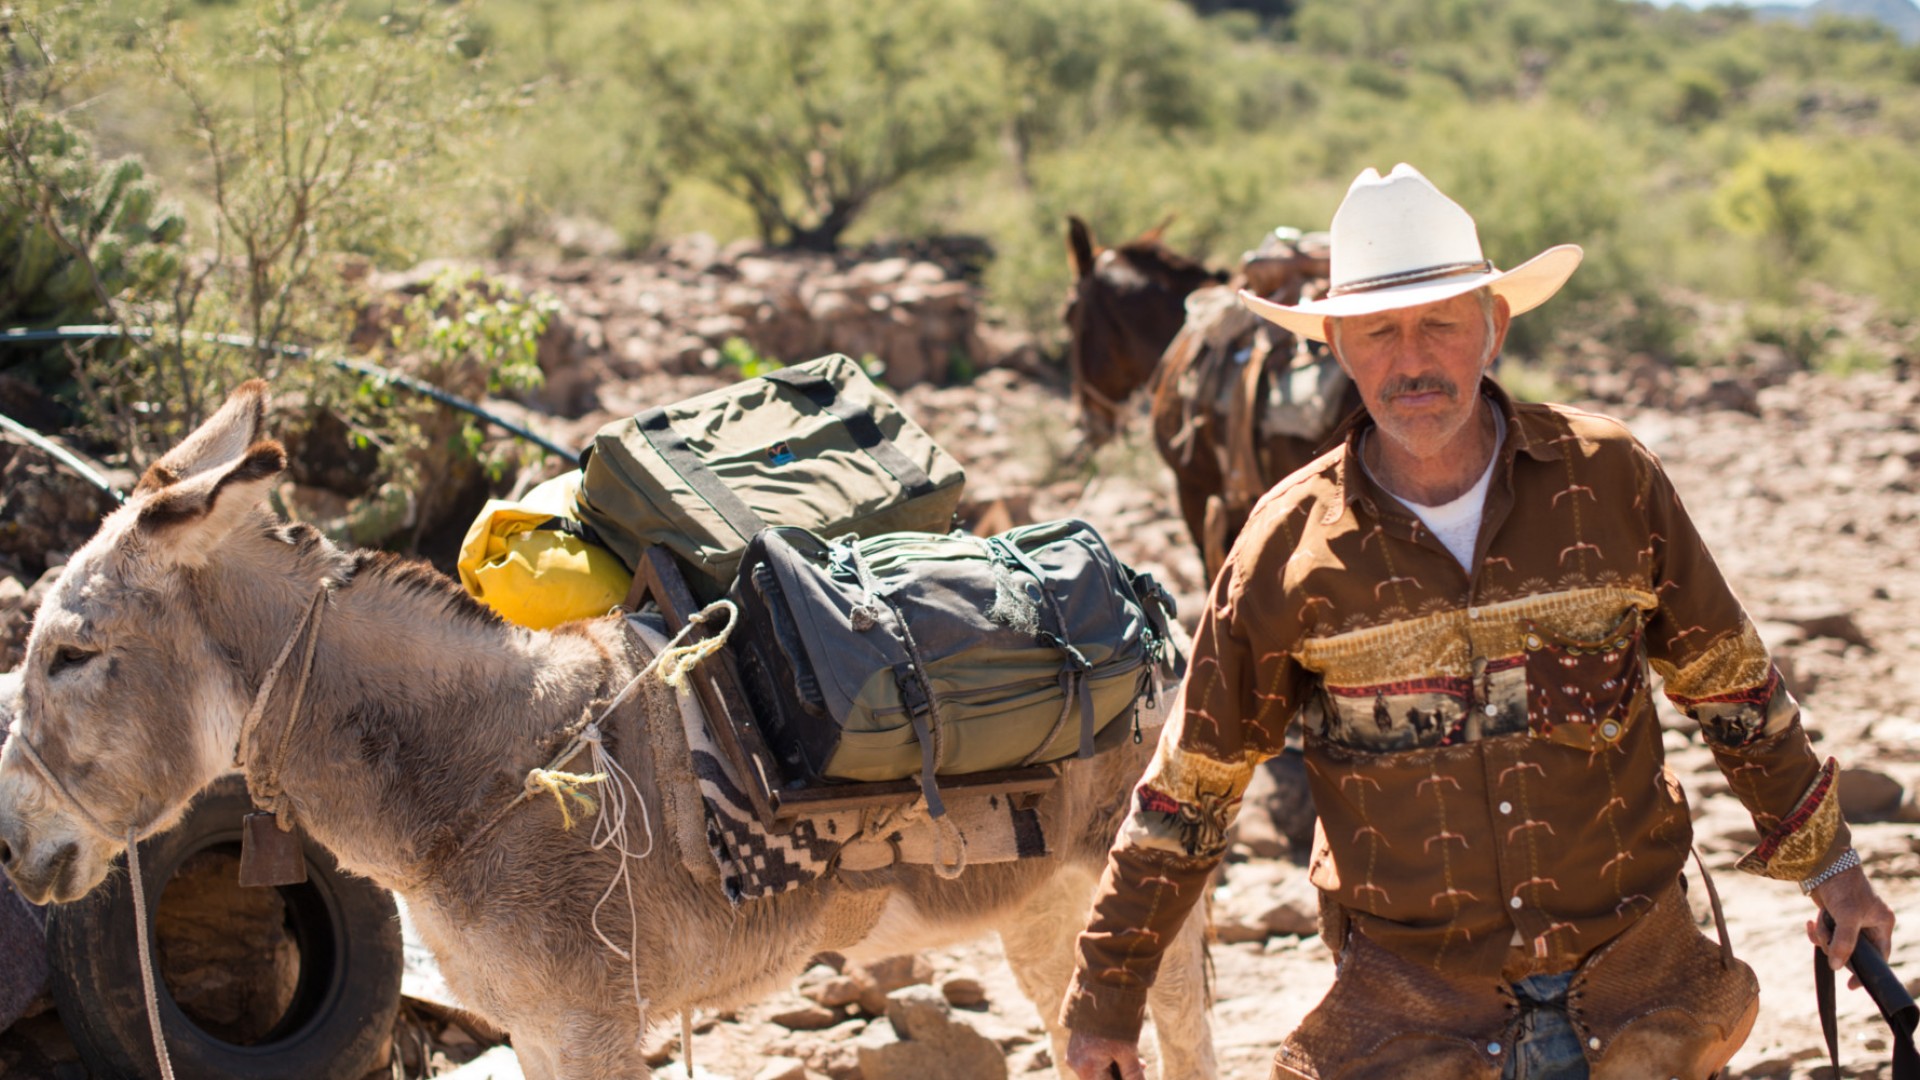 Man with a white cowboy hat pulling a horse carrying gear on a hike in baja